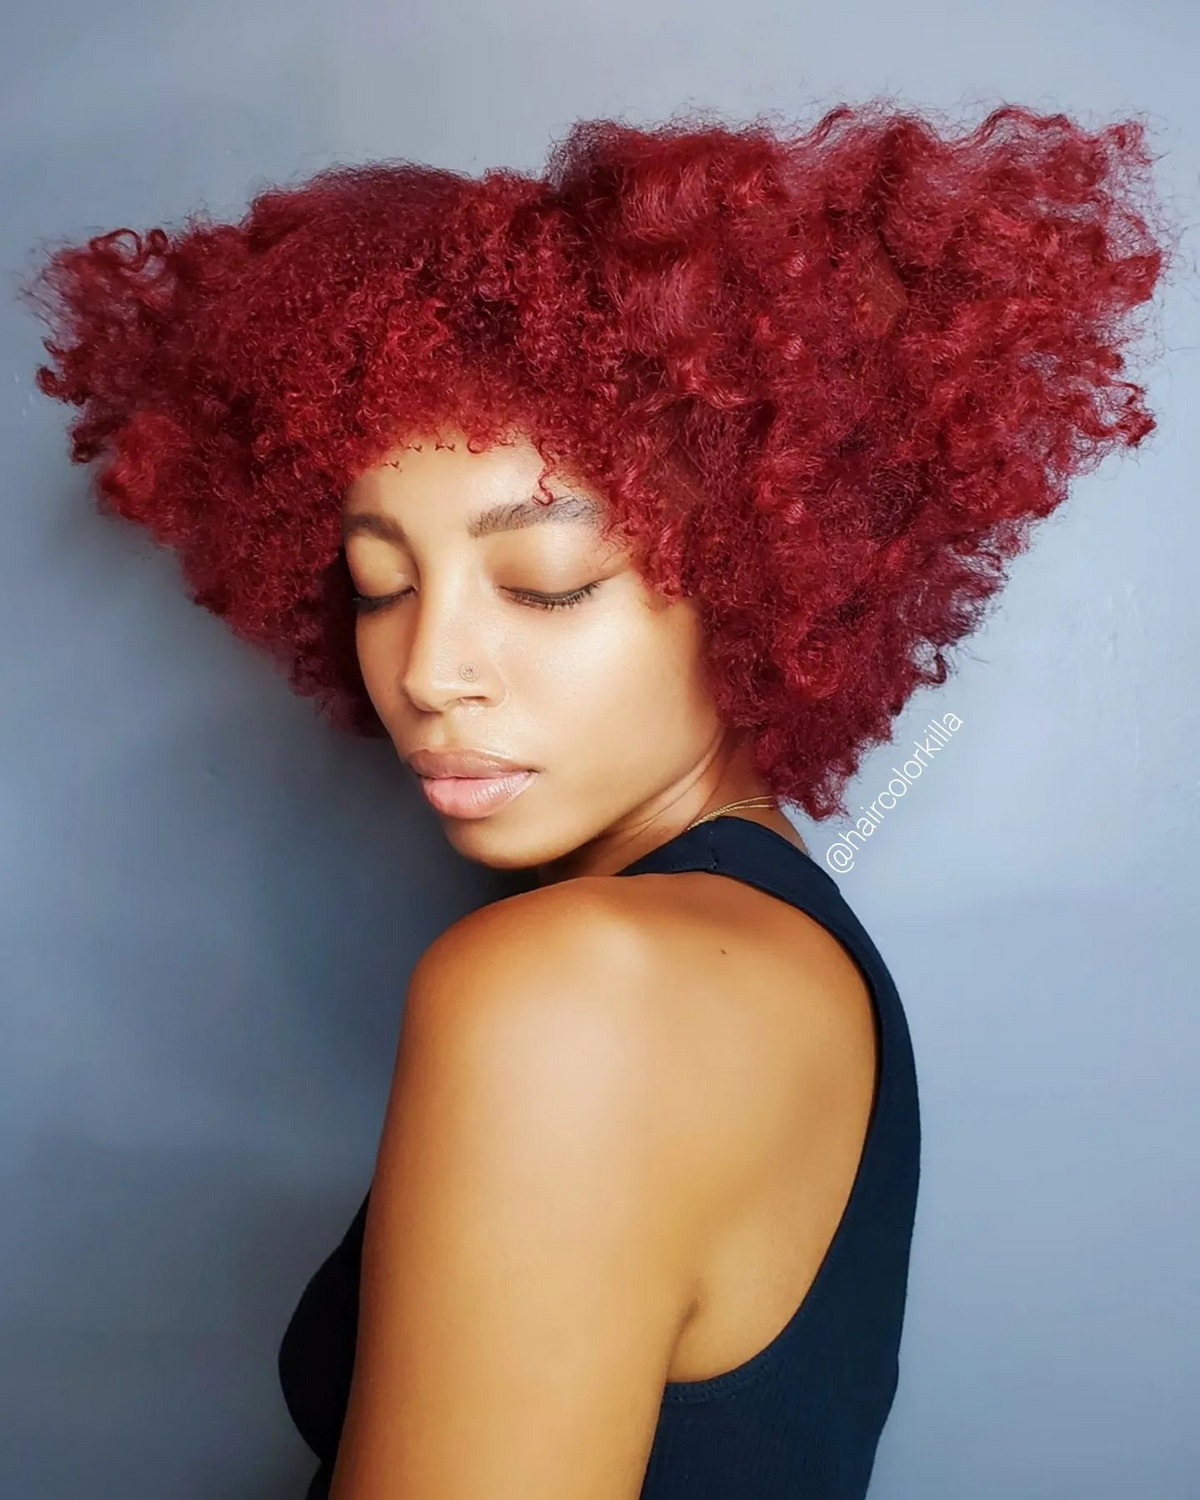 35 Hair Colors for Dark Skin That Are Beautiful and Bold - Hood MWR